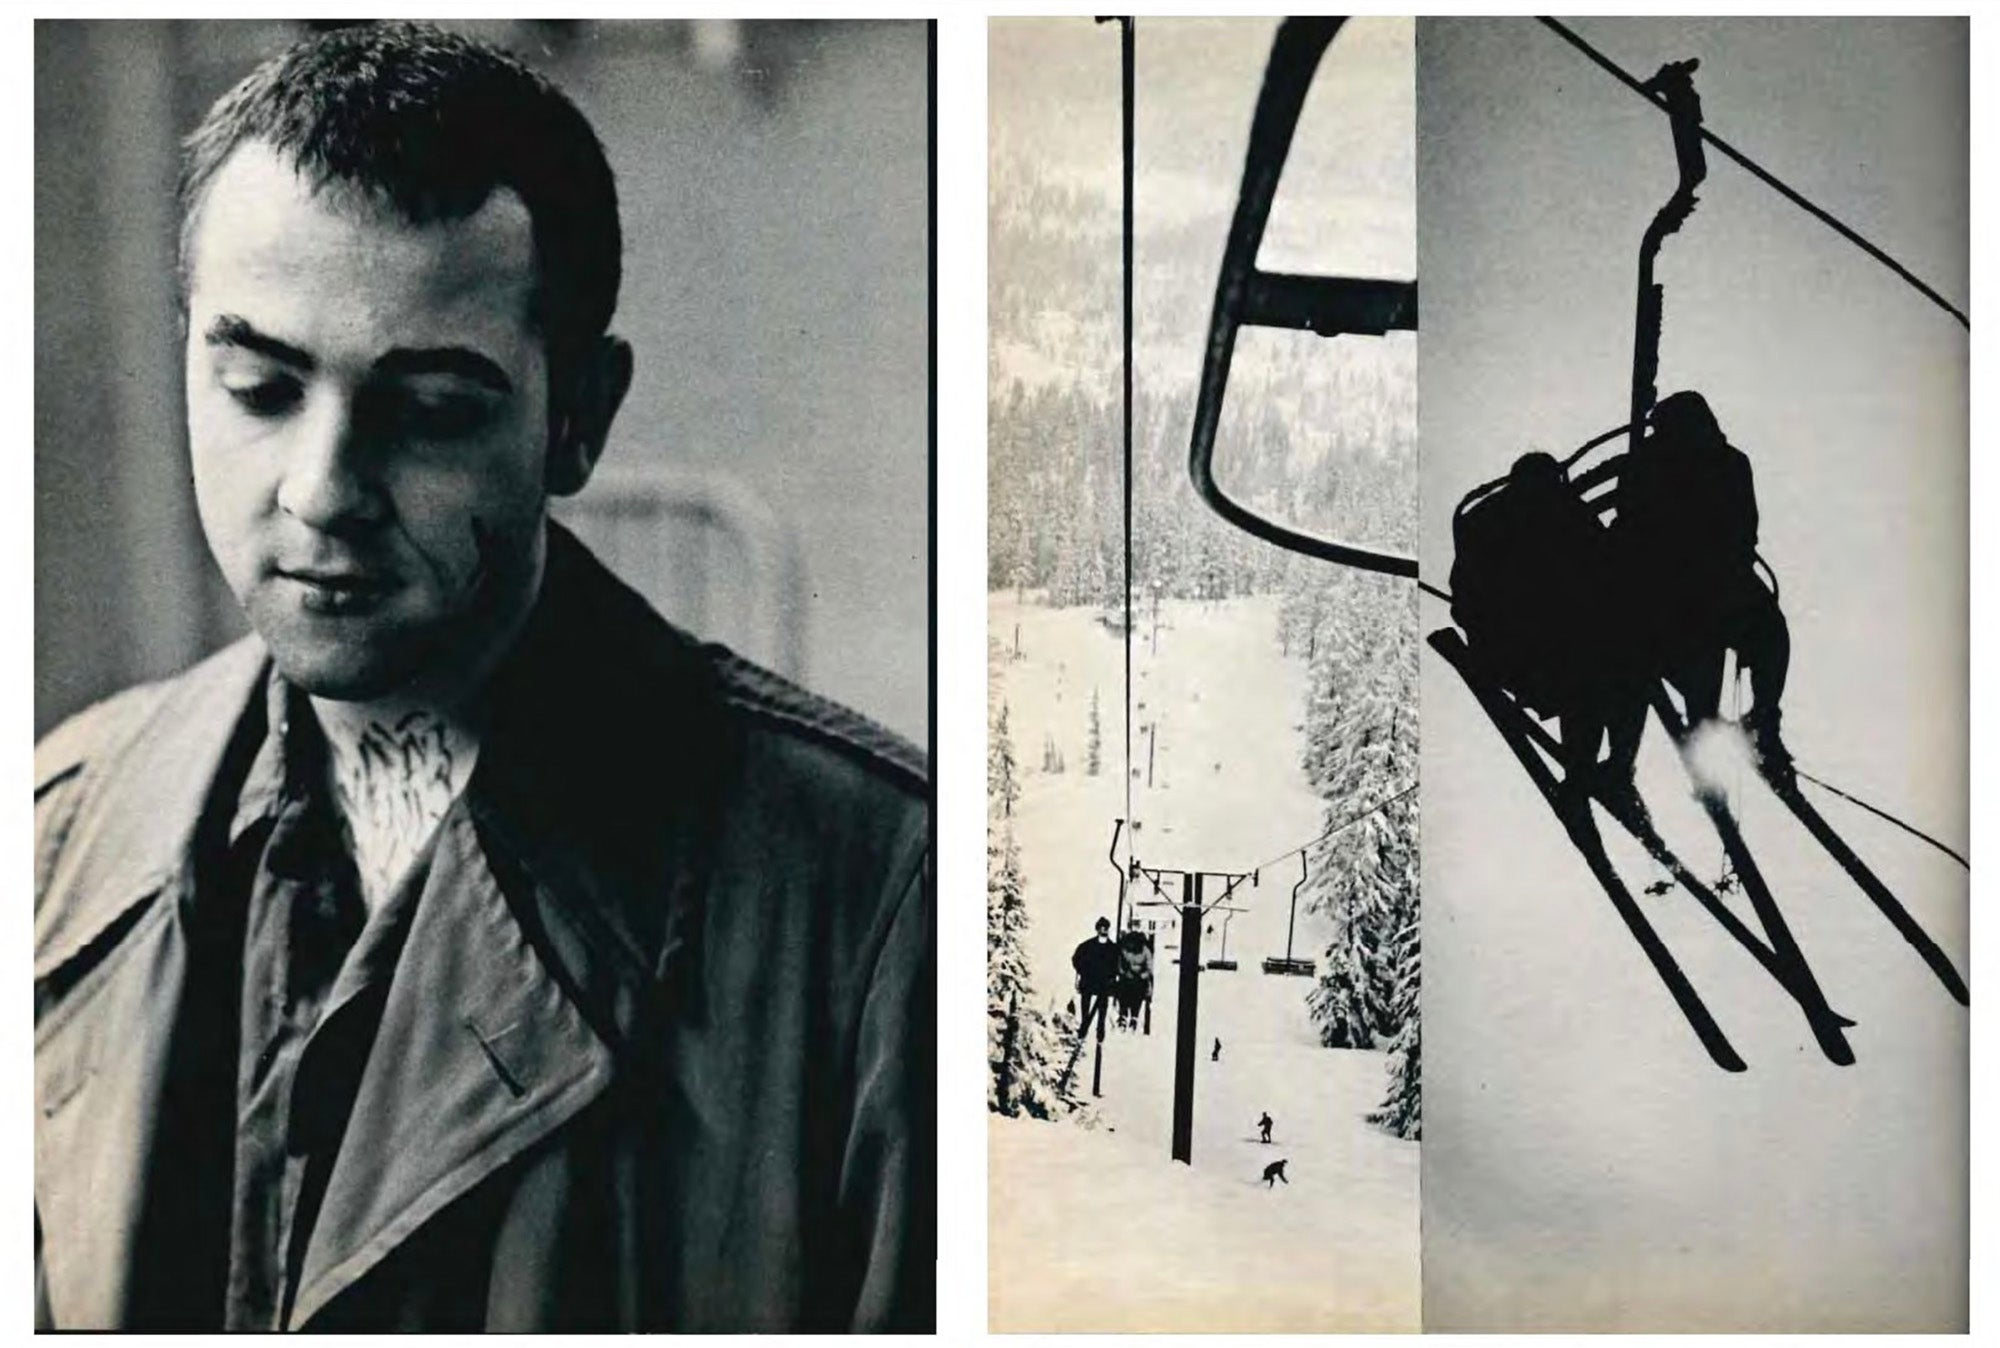 Two images side by side. On the left is a portrait of a man wearing a jacket looking downward. On the right is a collage of two images of a ski lift in the winter.